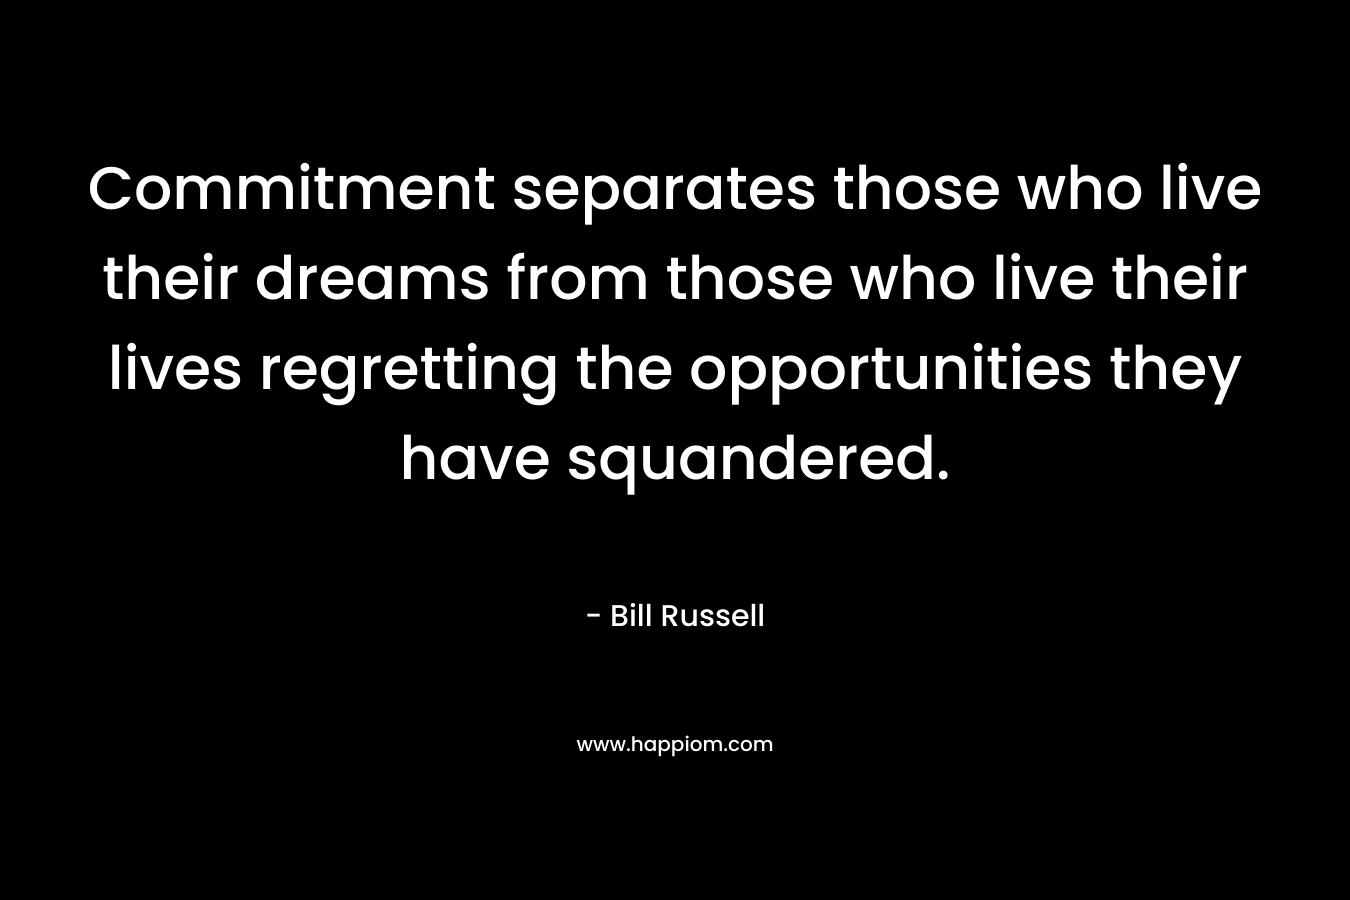 Commitment separates those who live their dreams from those who live their lives regretting the opportunities they have squandered. – Bill Russell